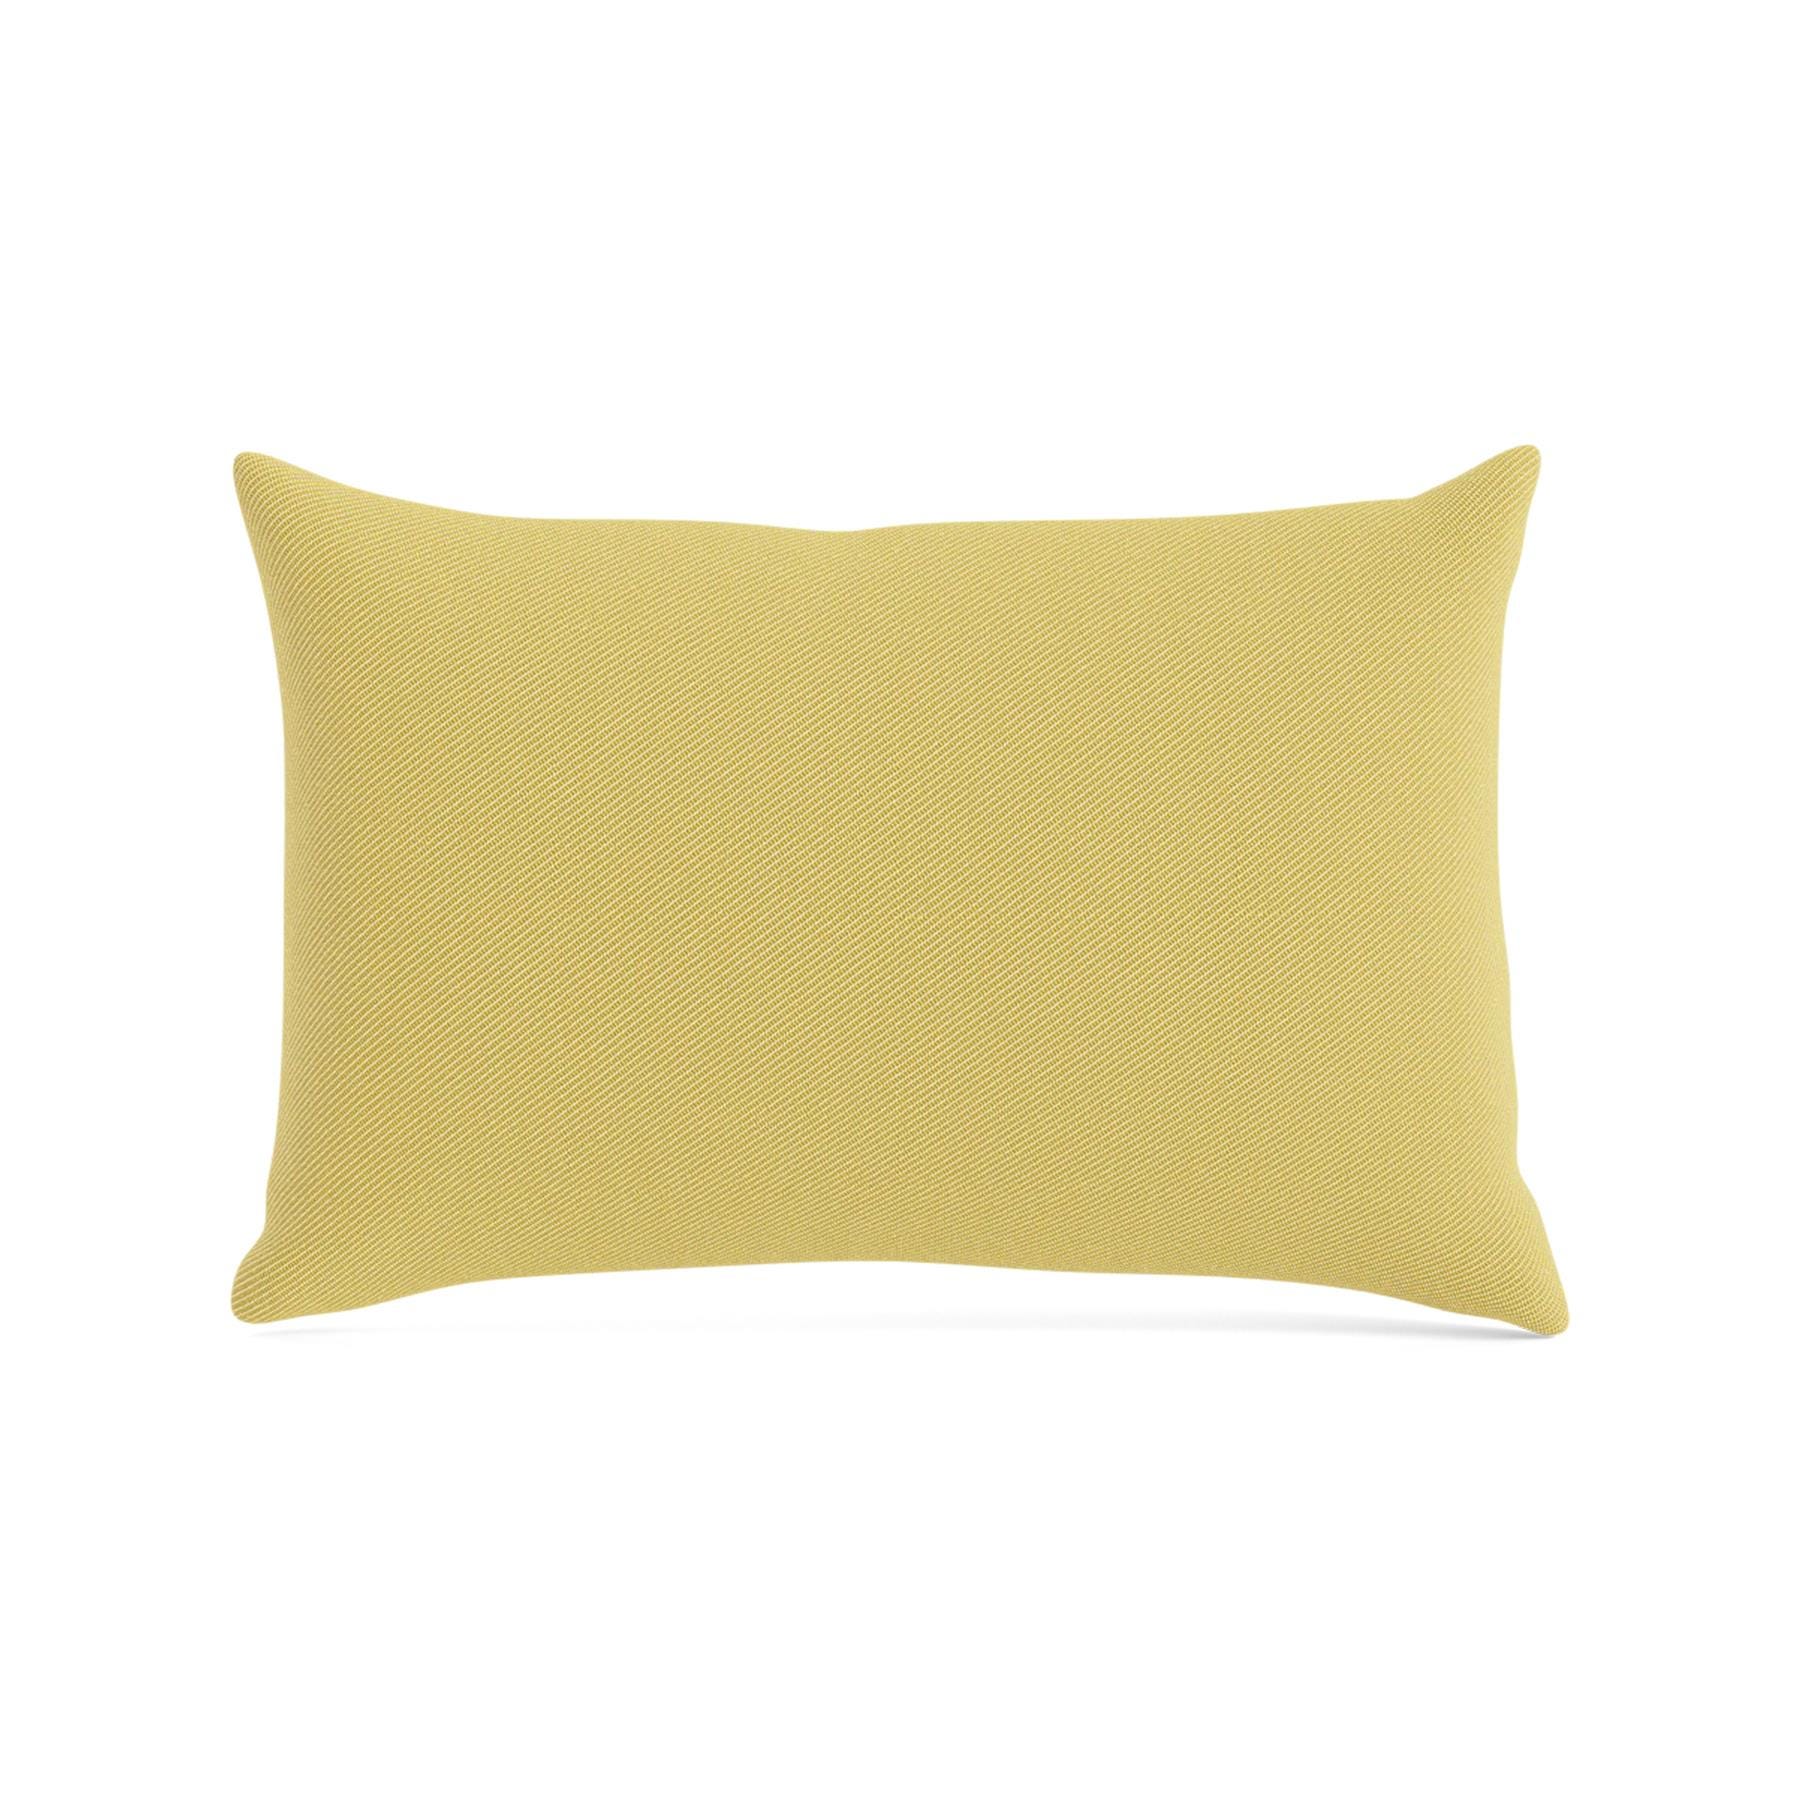 Make Nordic Pillow 40cmx60cm Twill Weave 430 Down And Fibers Yellow